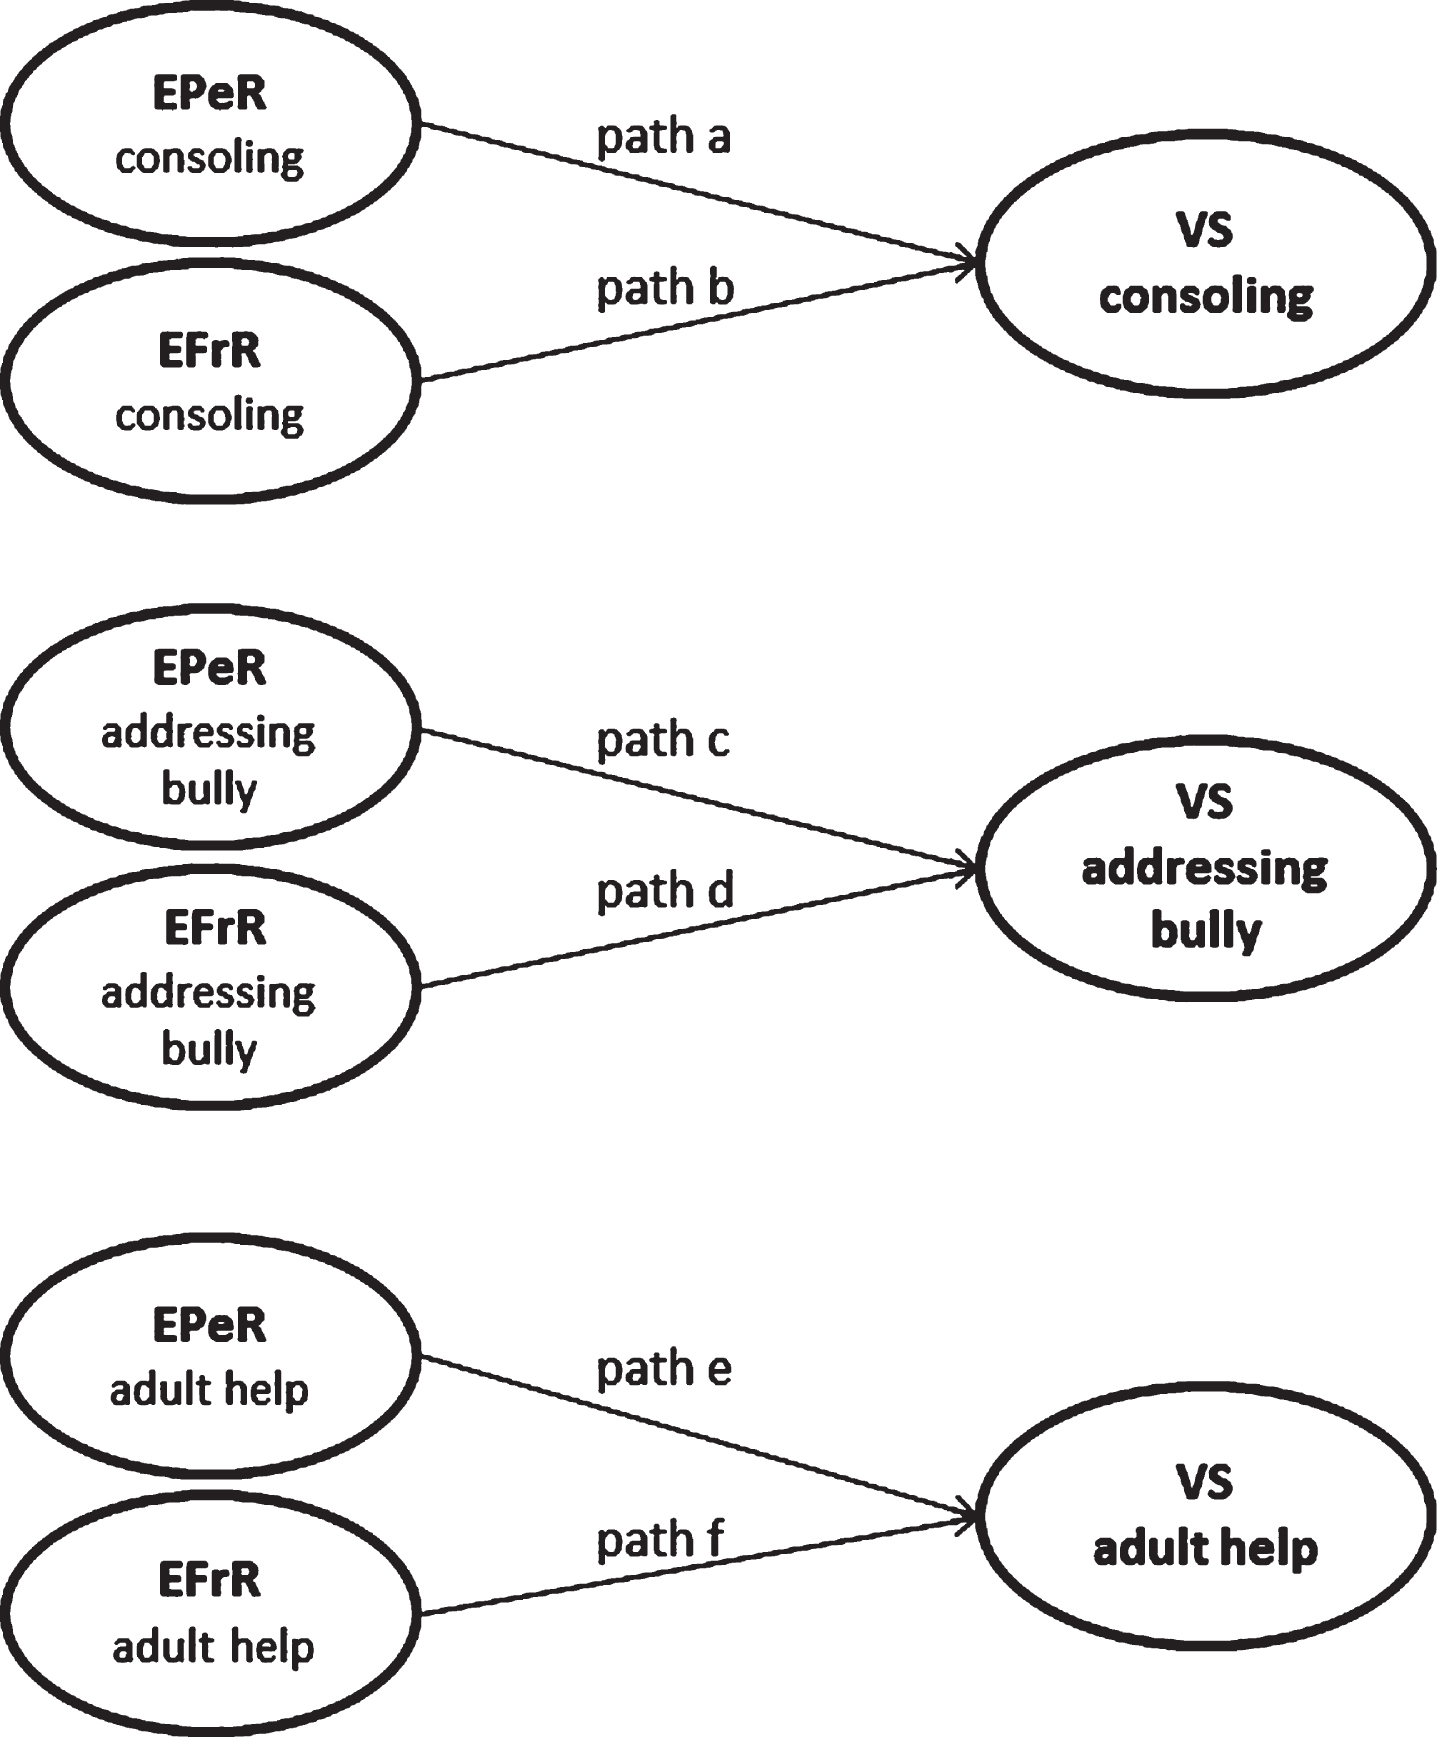 The Theoretical Model Illustrating the Pathways from Expected Peer and Expected Friend Reactions to Predict three Types of Victim SupportNote. EPeR = Expected Peer Reactions; EFrR = Expected Friend Reactions; VS = Victim Support